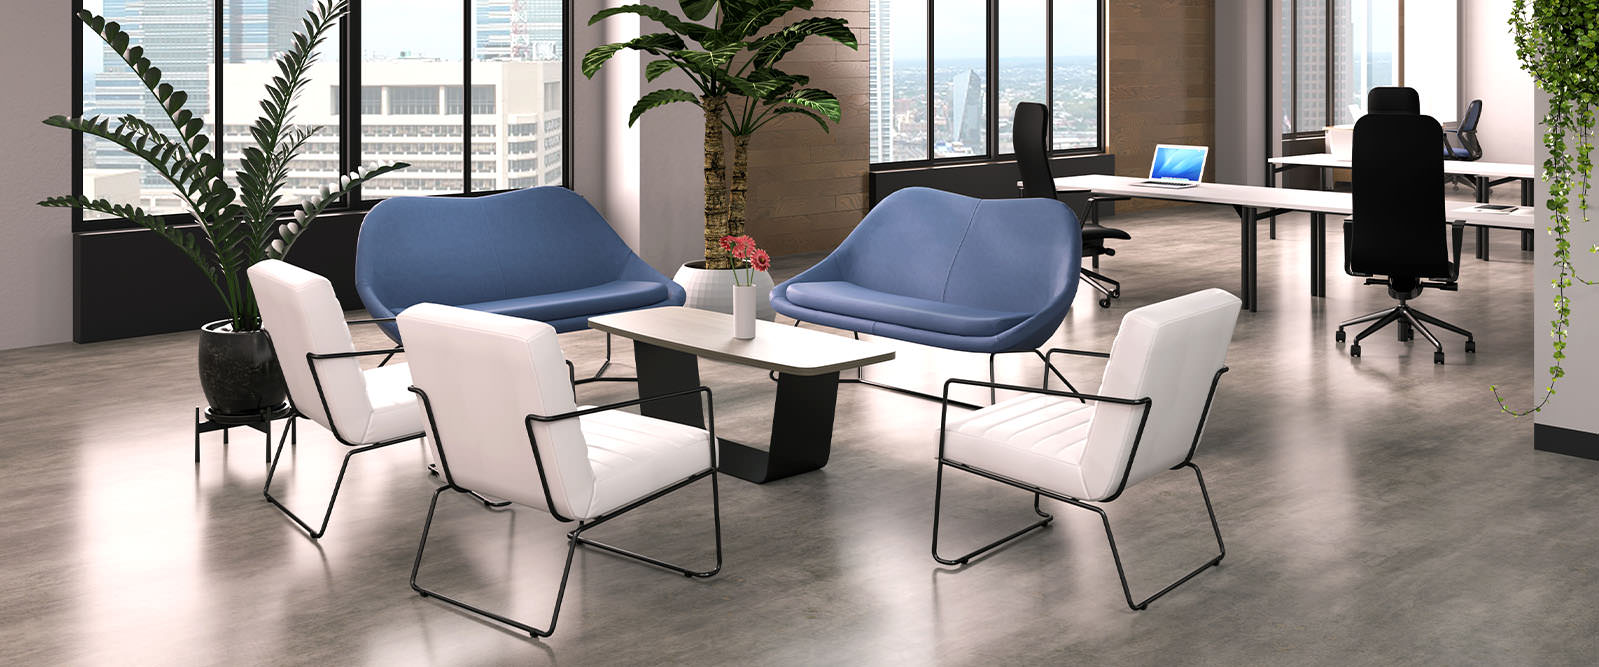 Multifunctional modern office with a lounge breakout area.